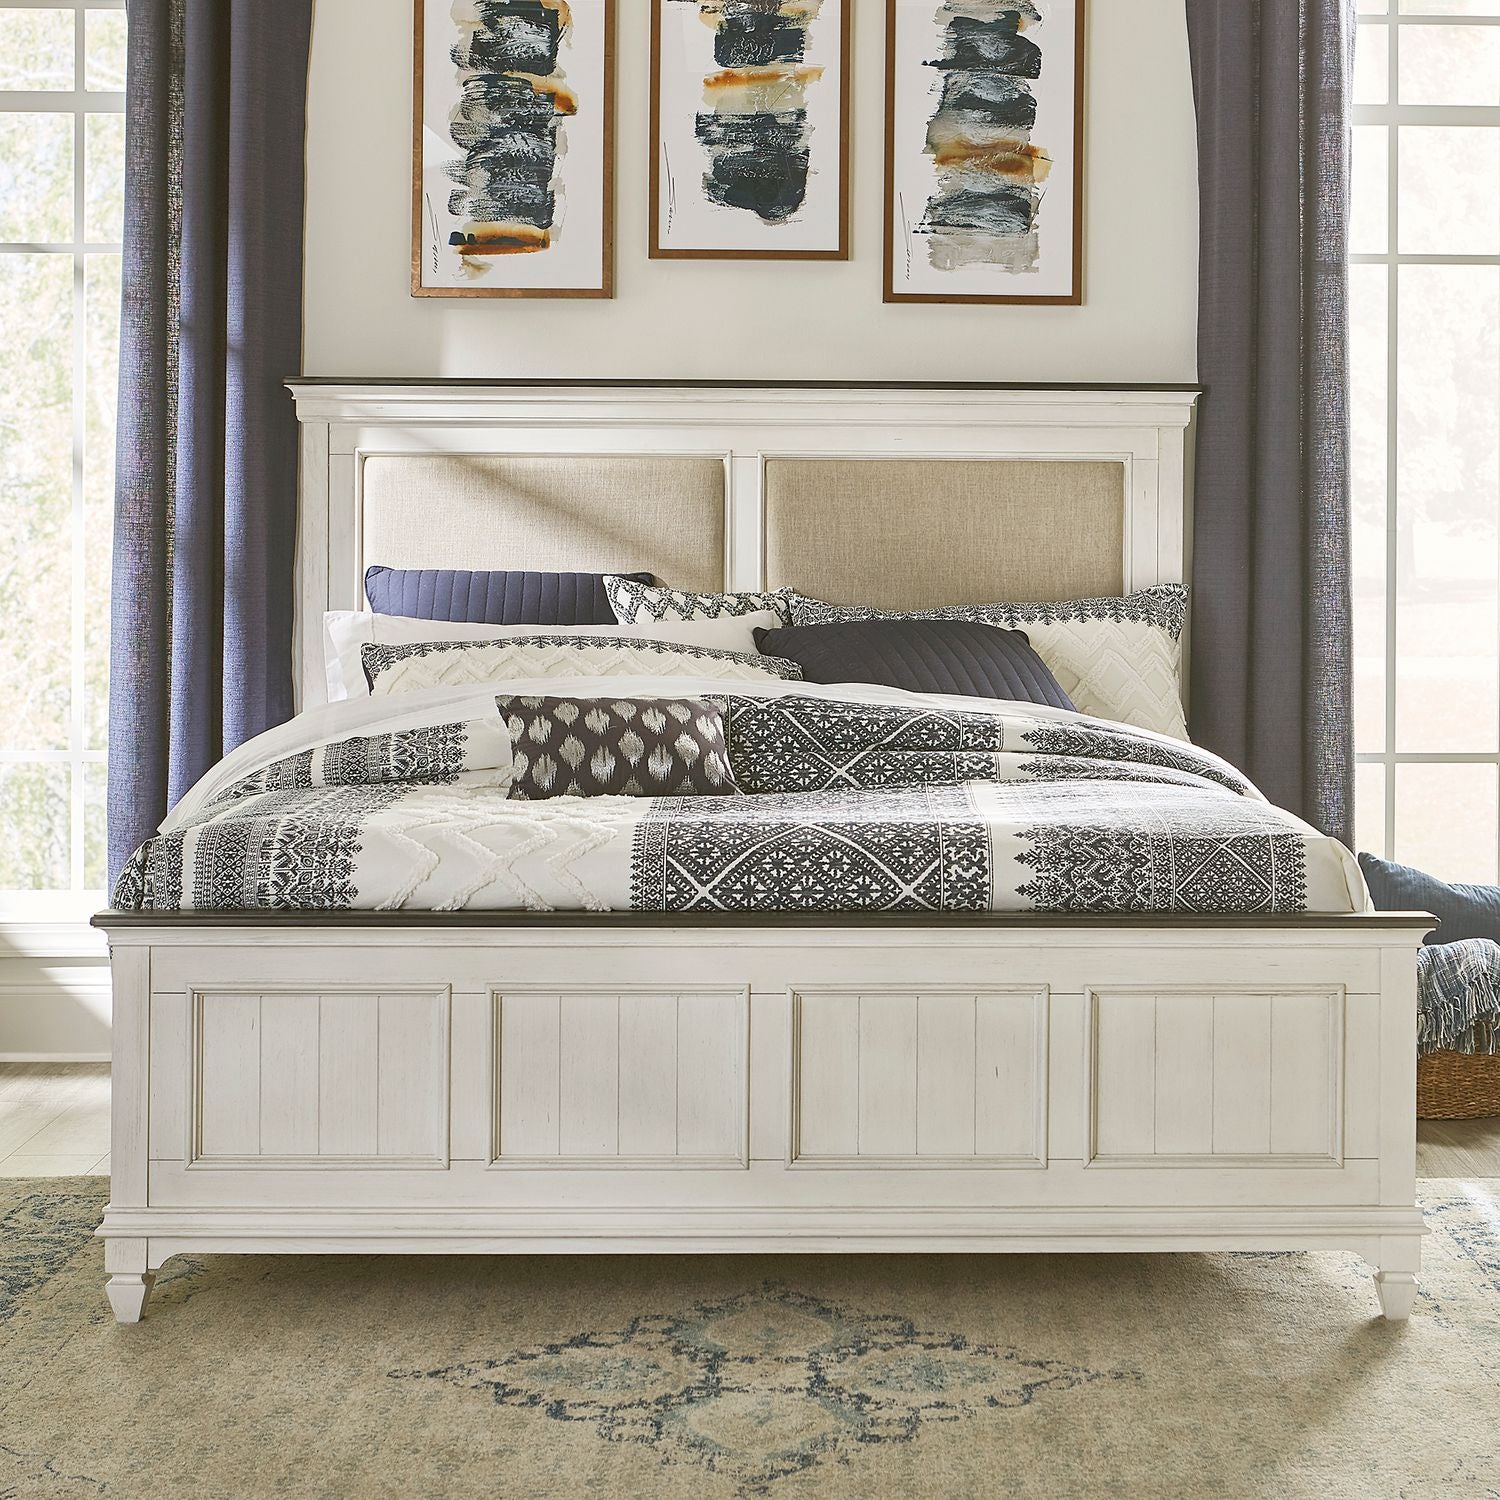 Allyson Park 417-BR Upholstered Headboard Bedroom Collection from Liberty Furniture